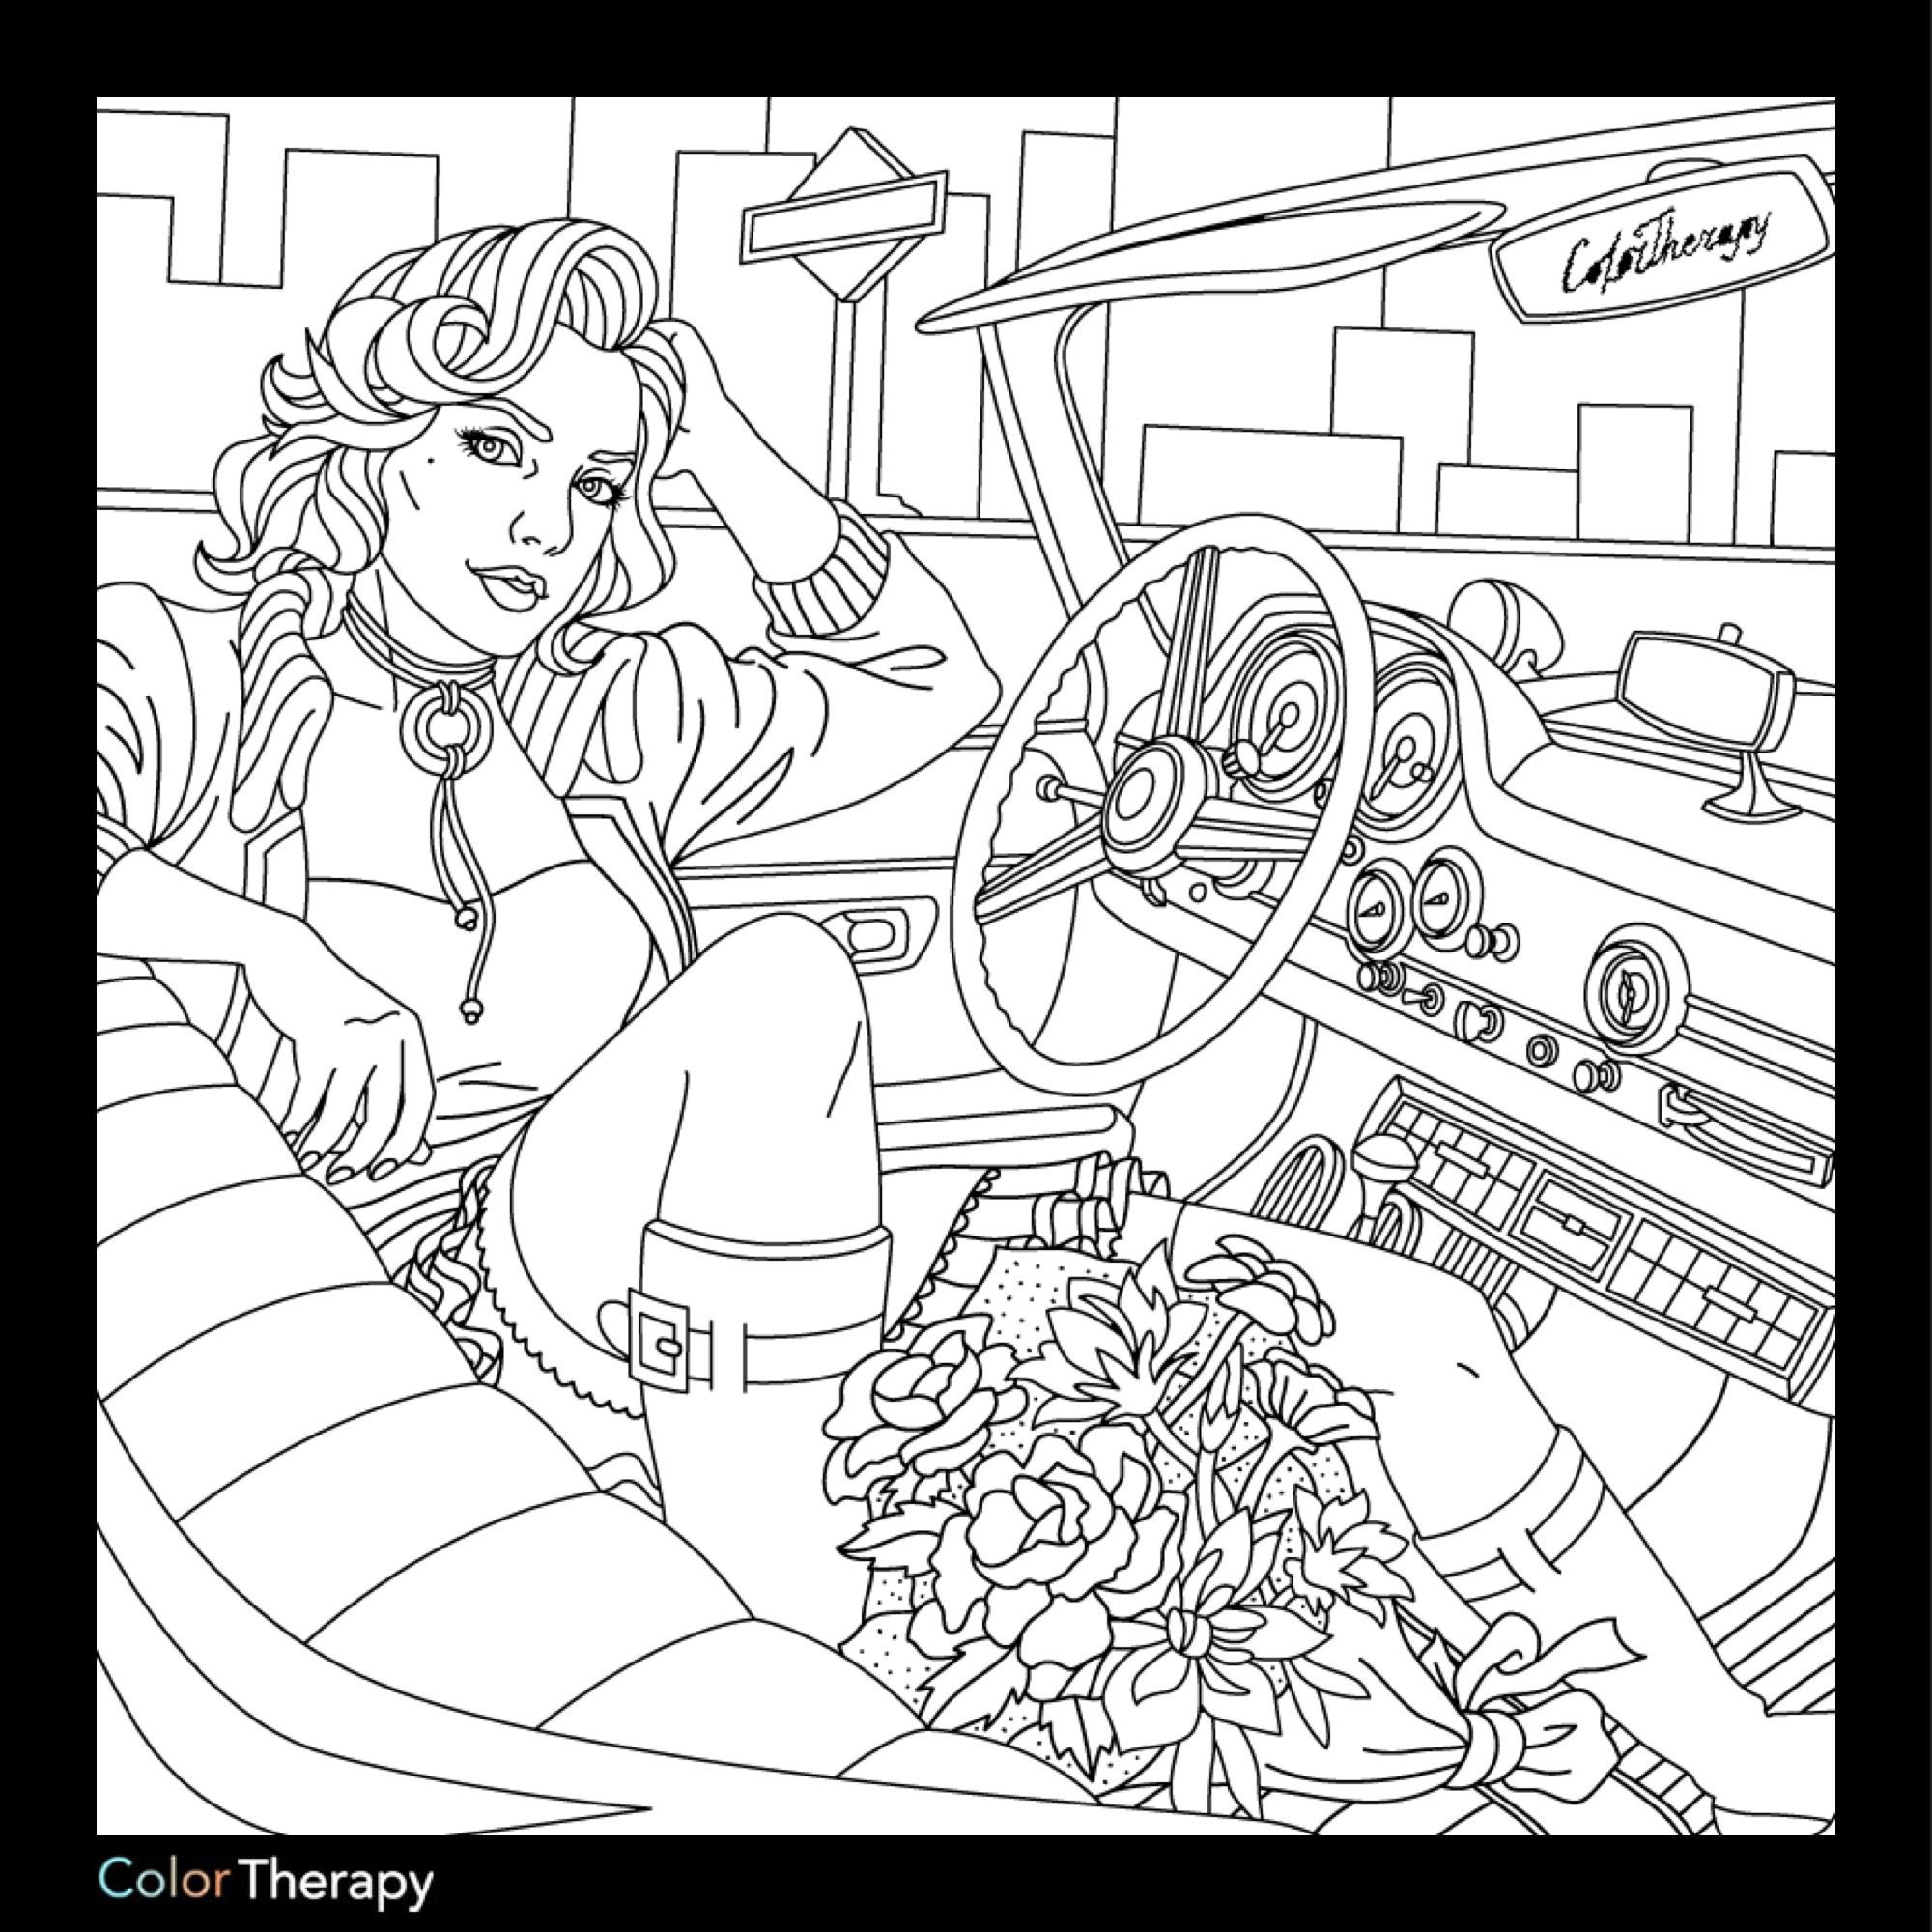 DIY Adult Coloring Book
 Pin by Val Wilson on Coloring pages Pinterest